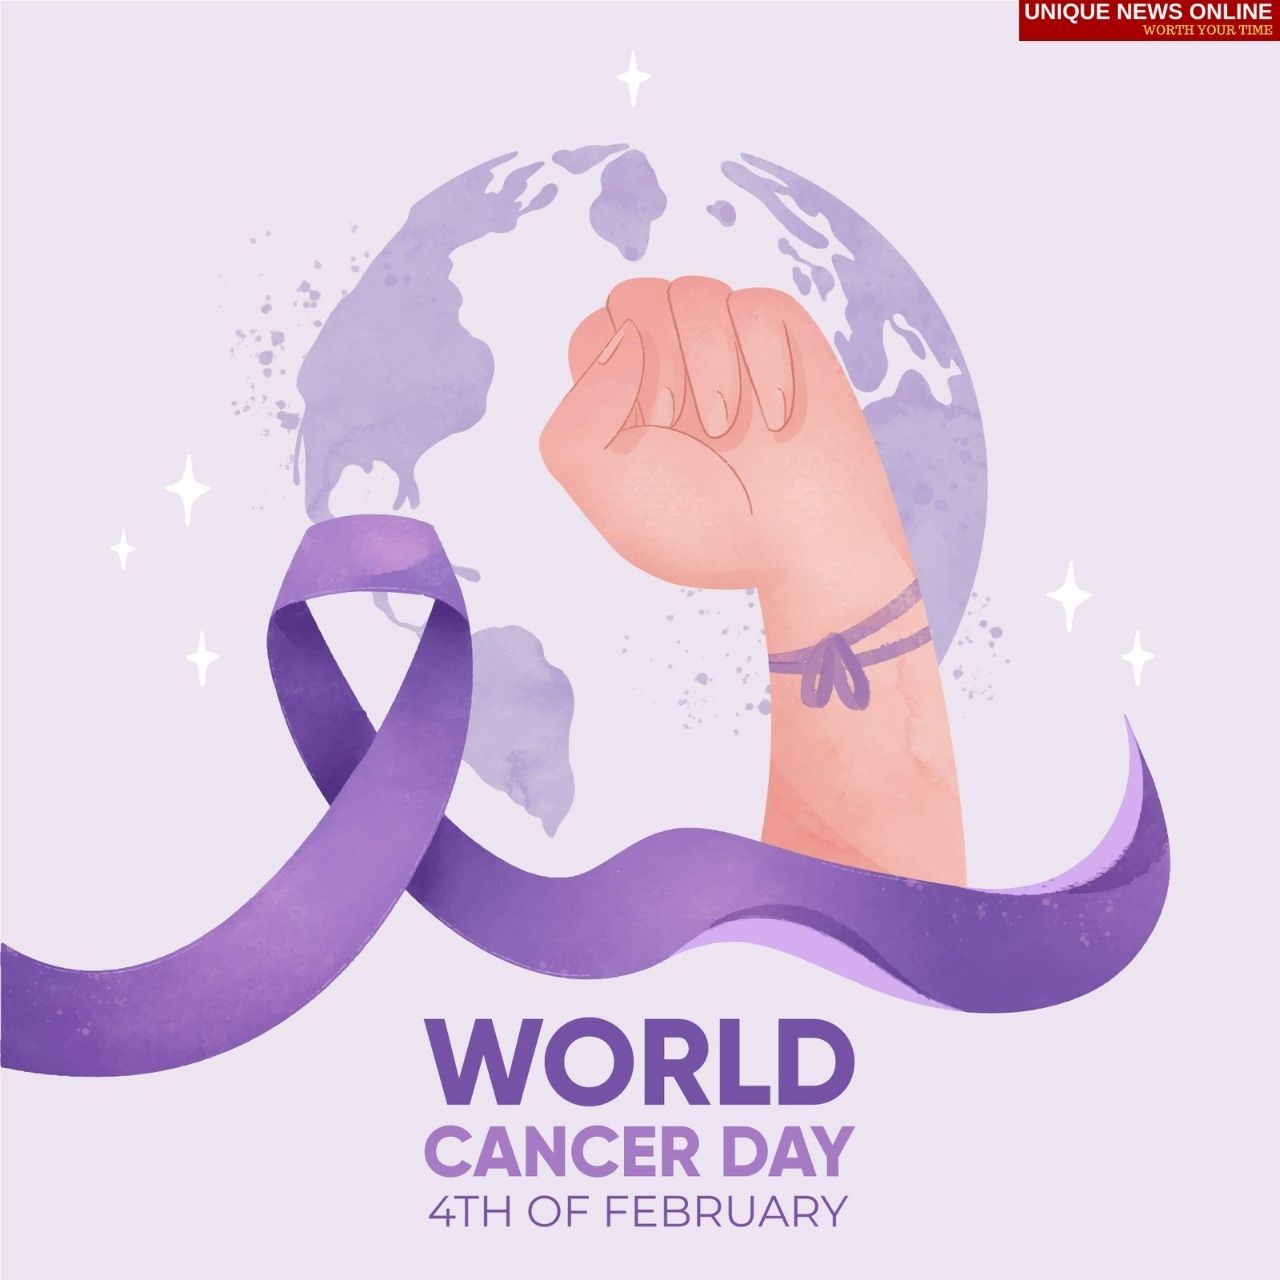 World Cancer Day 2022 Instagram Captions, Facebook Messages, WhatsApp Images, and other social media posts to create awareness